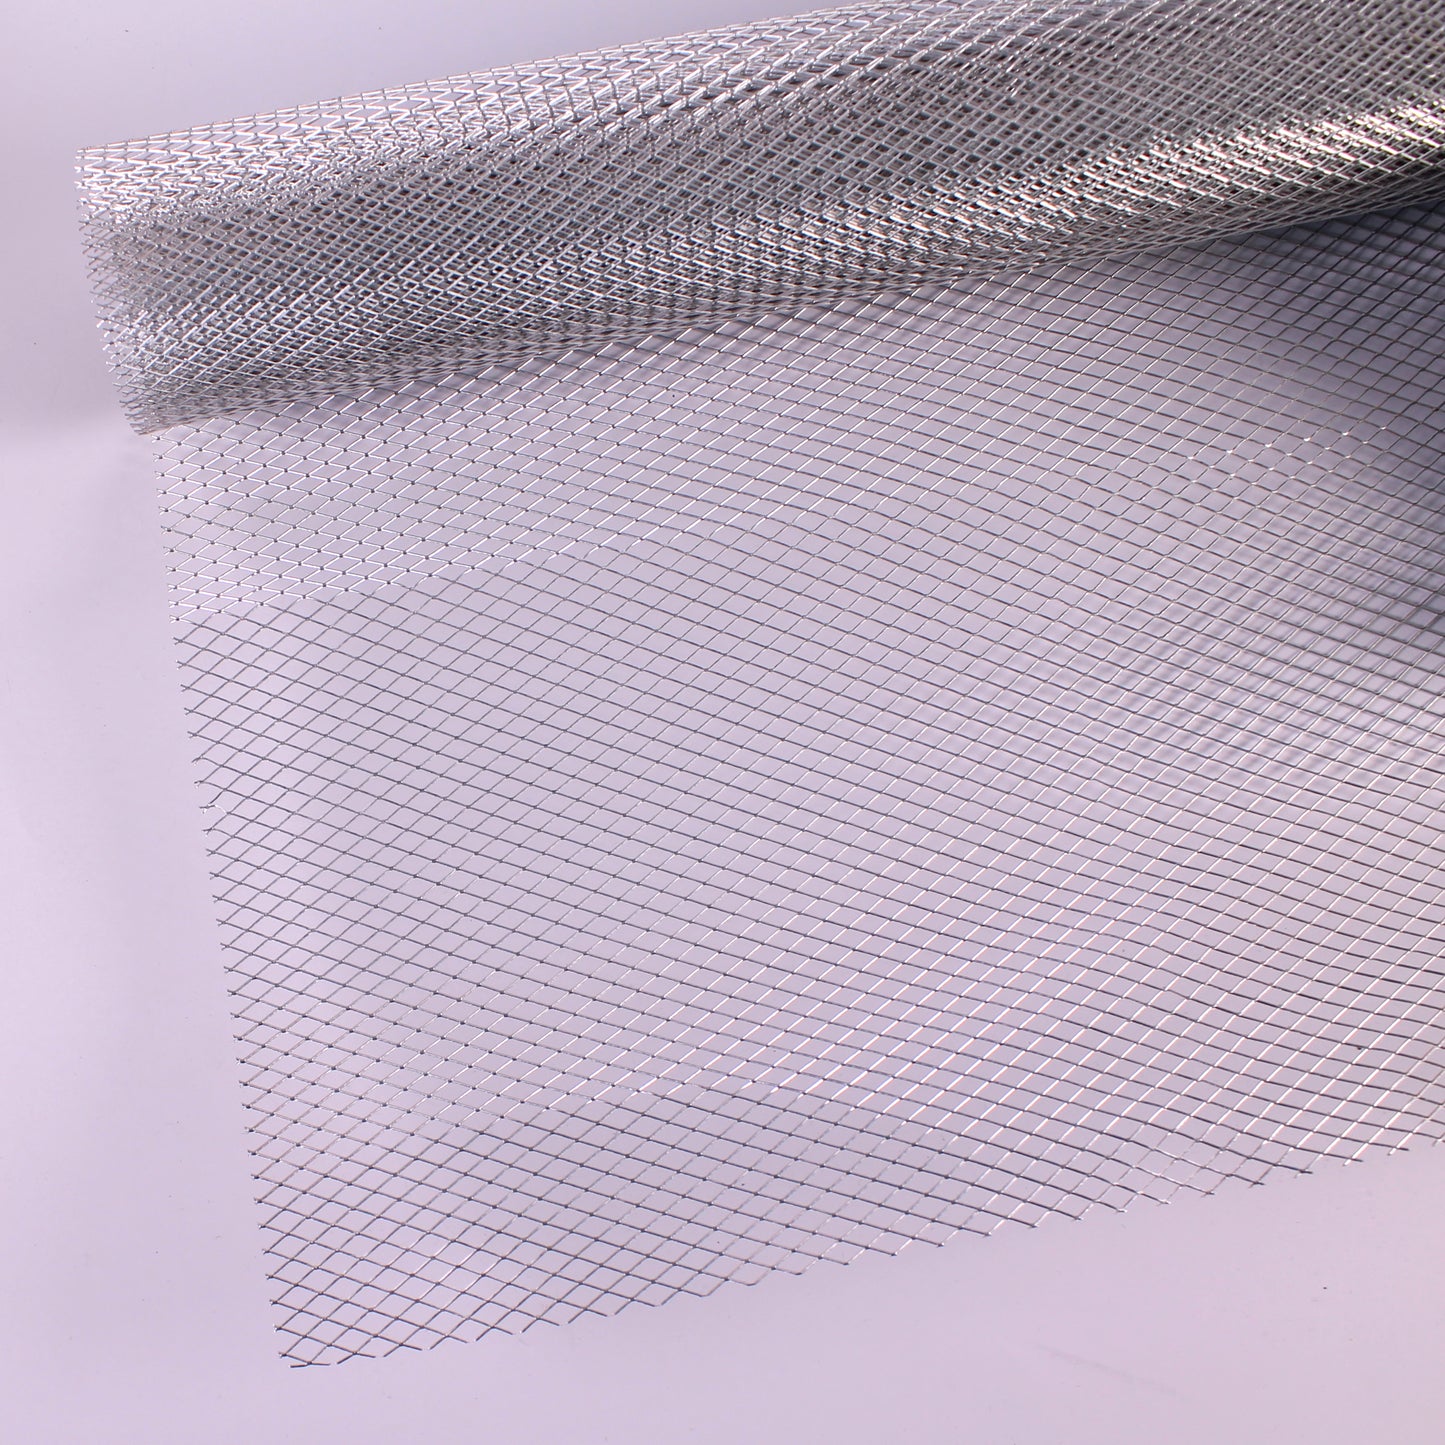 wire mesh roll